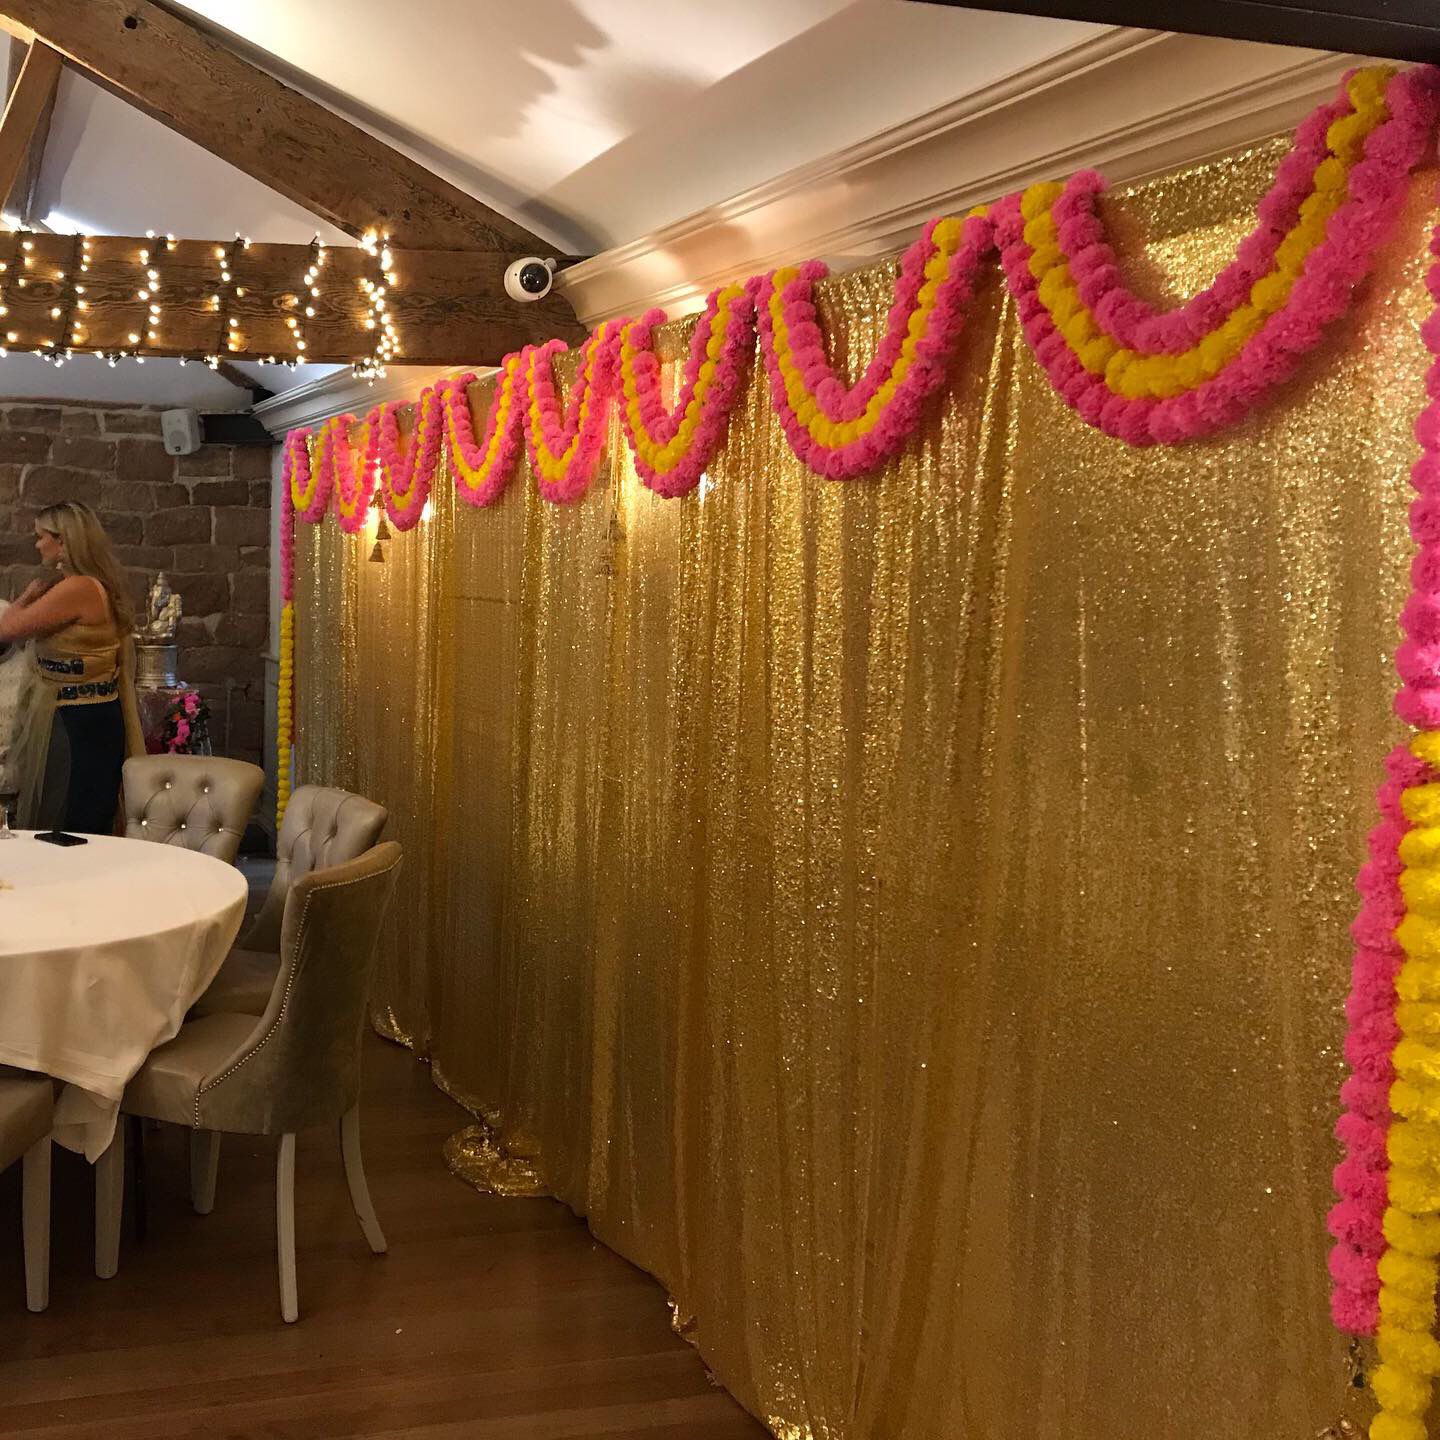 A beautiful golden and flowered backdrop for an Indian wedding breakfast